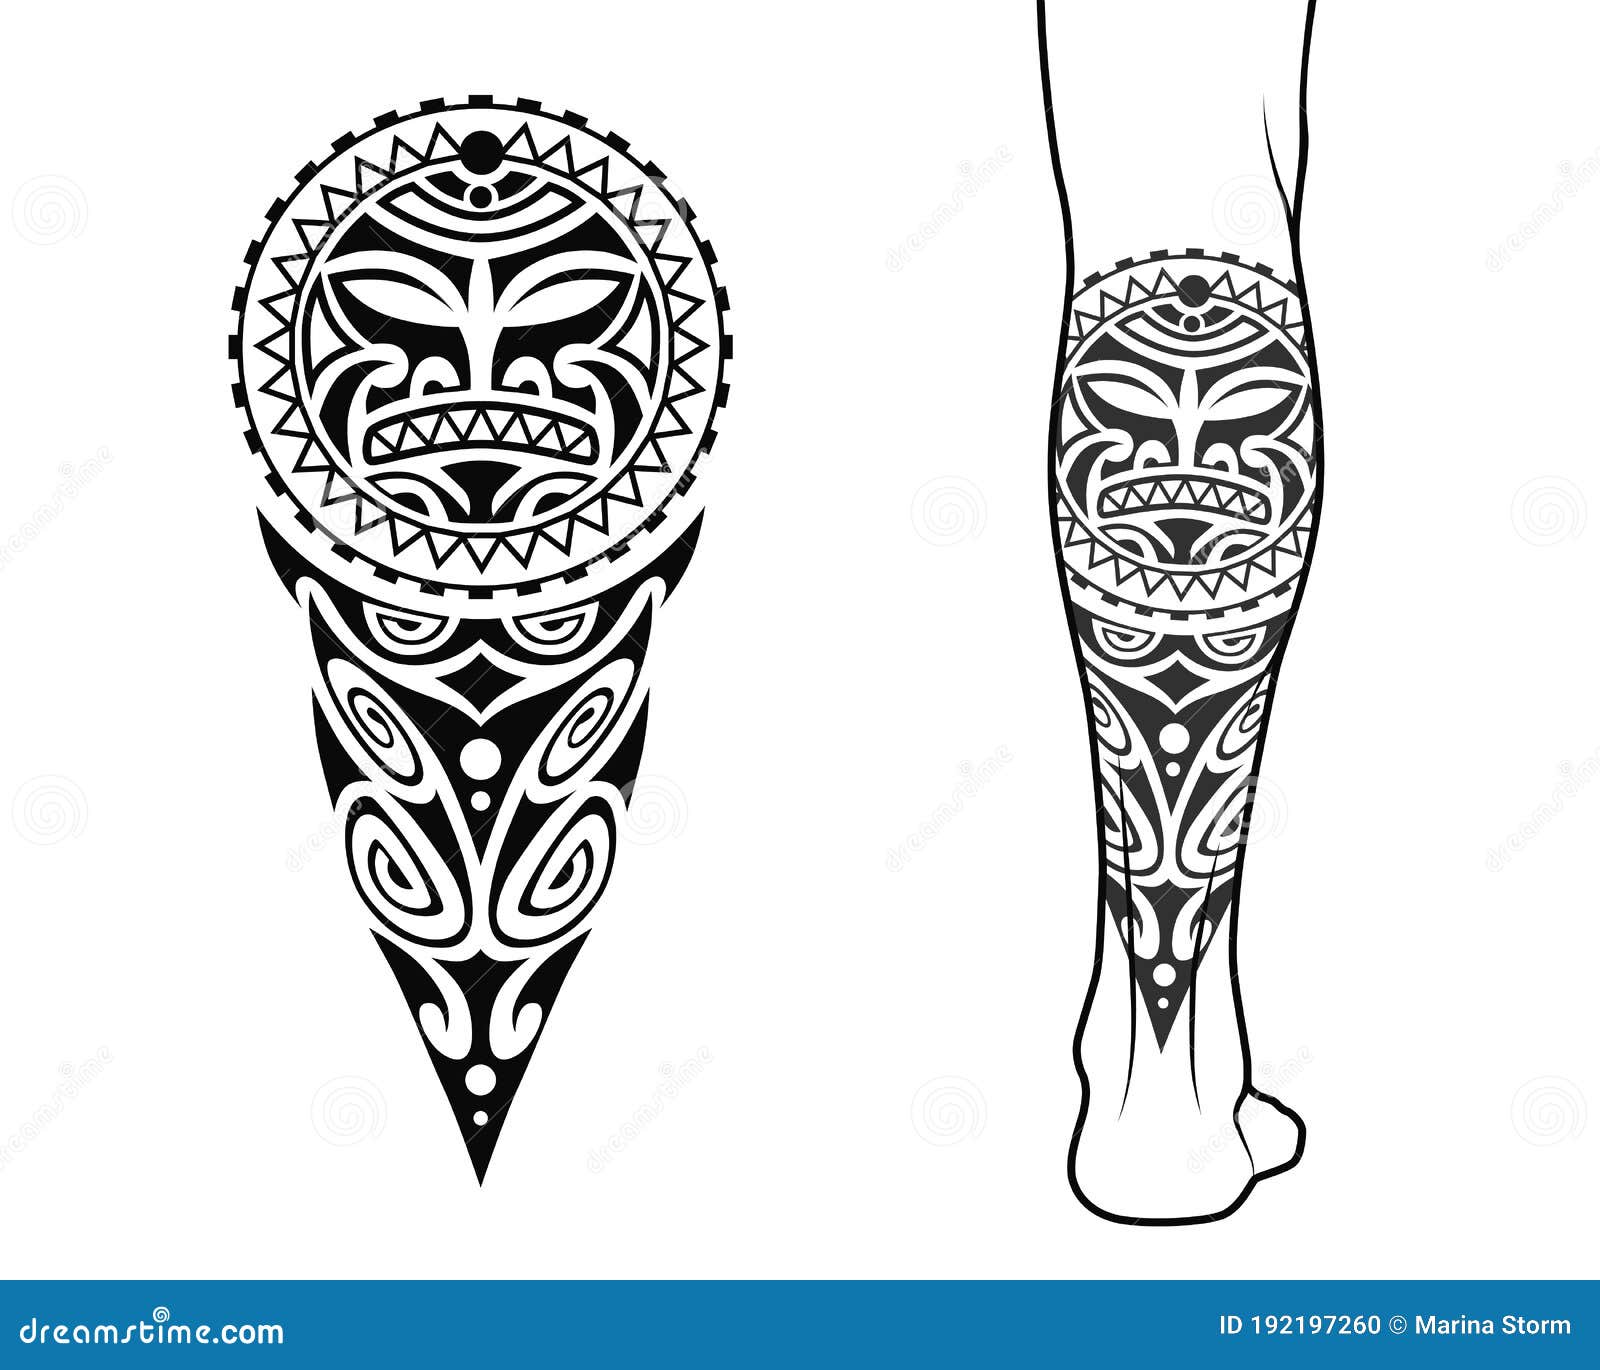 Maori Tribal Style Tattoo Pattern With Scorpio Fit For A Back